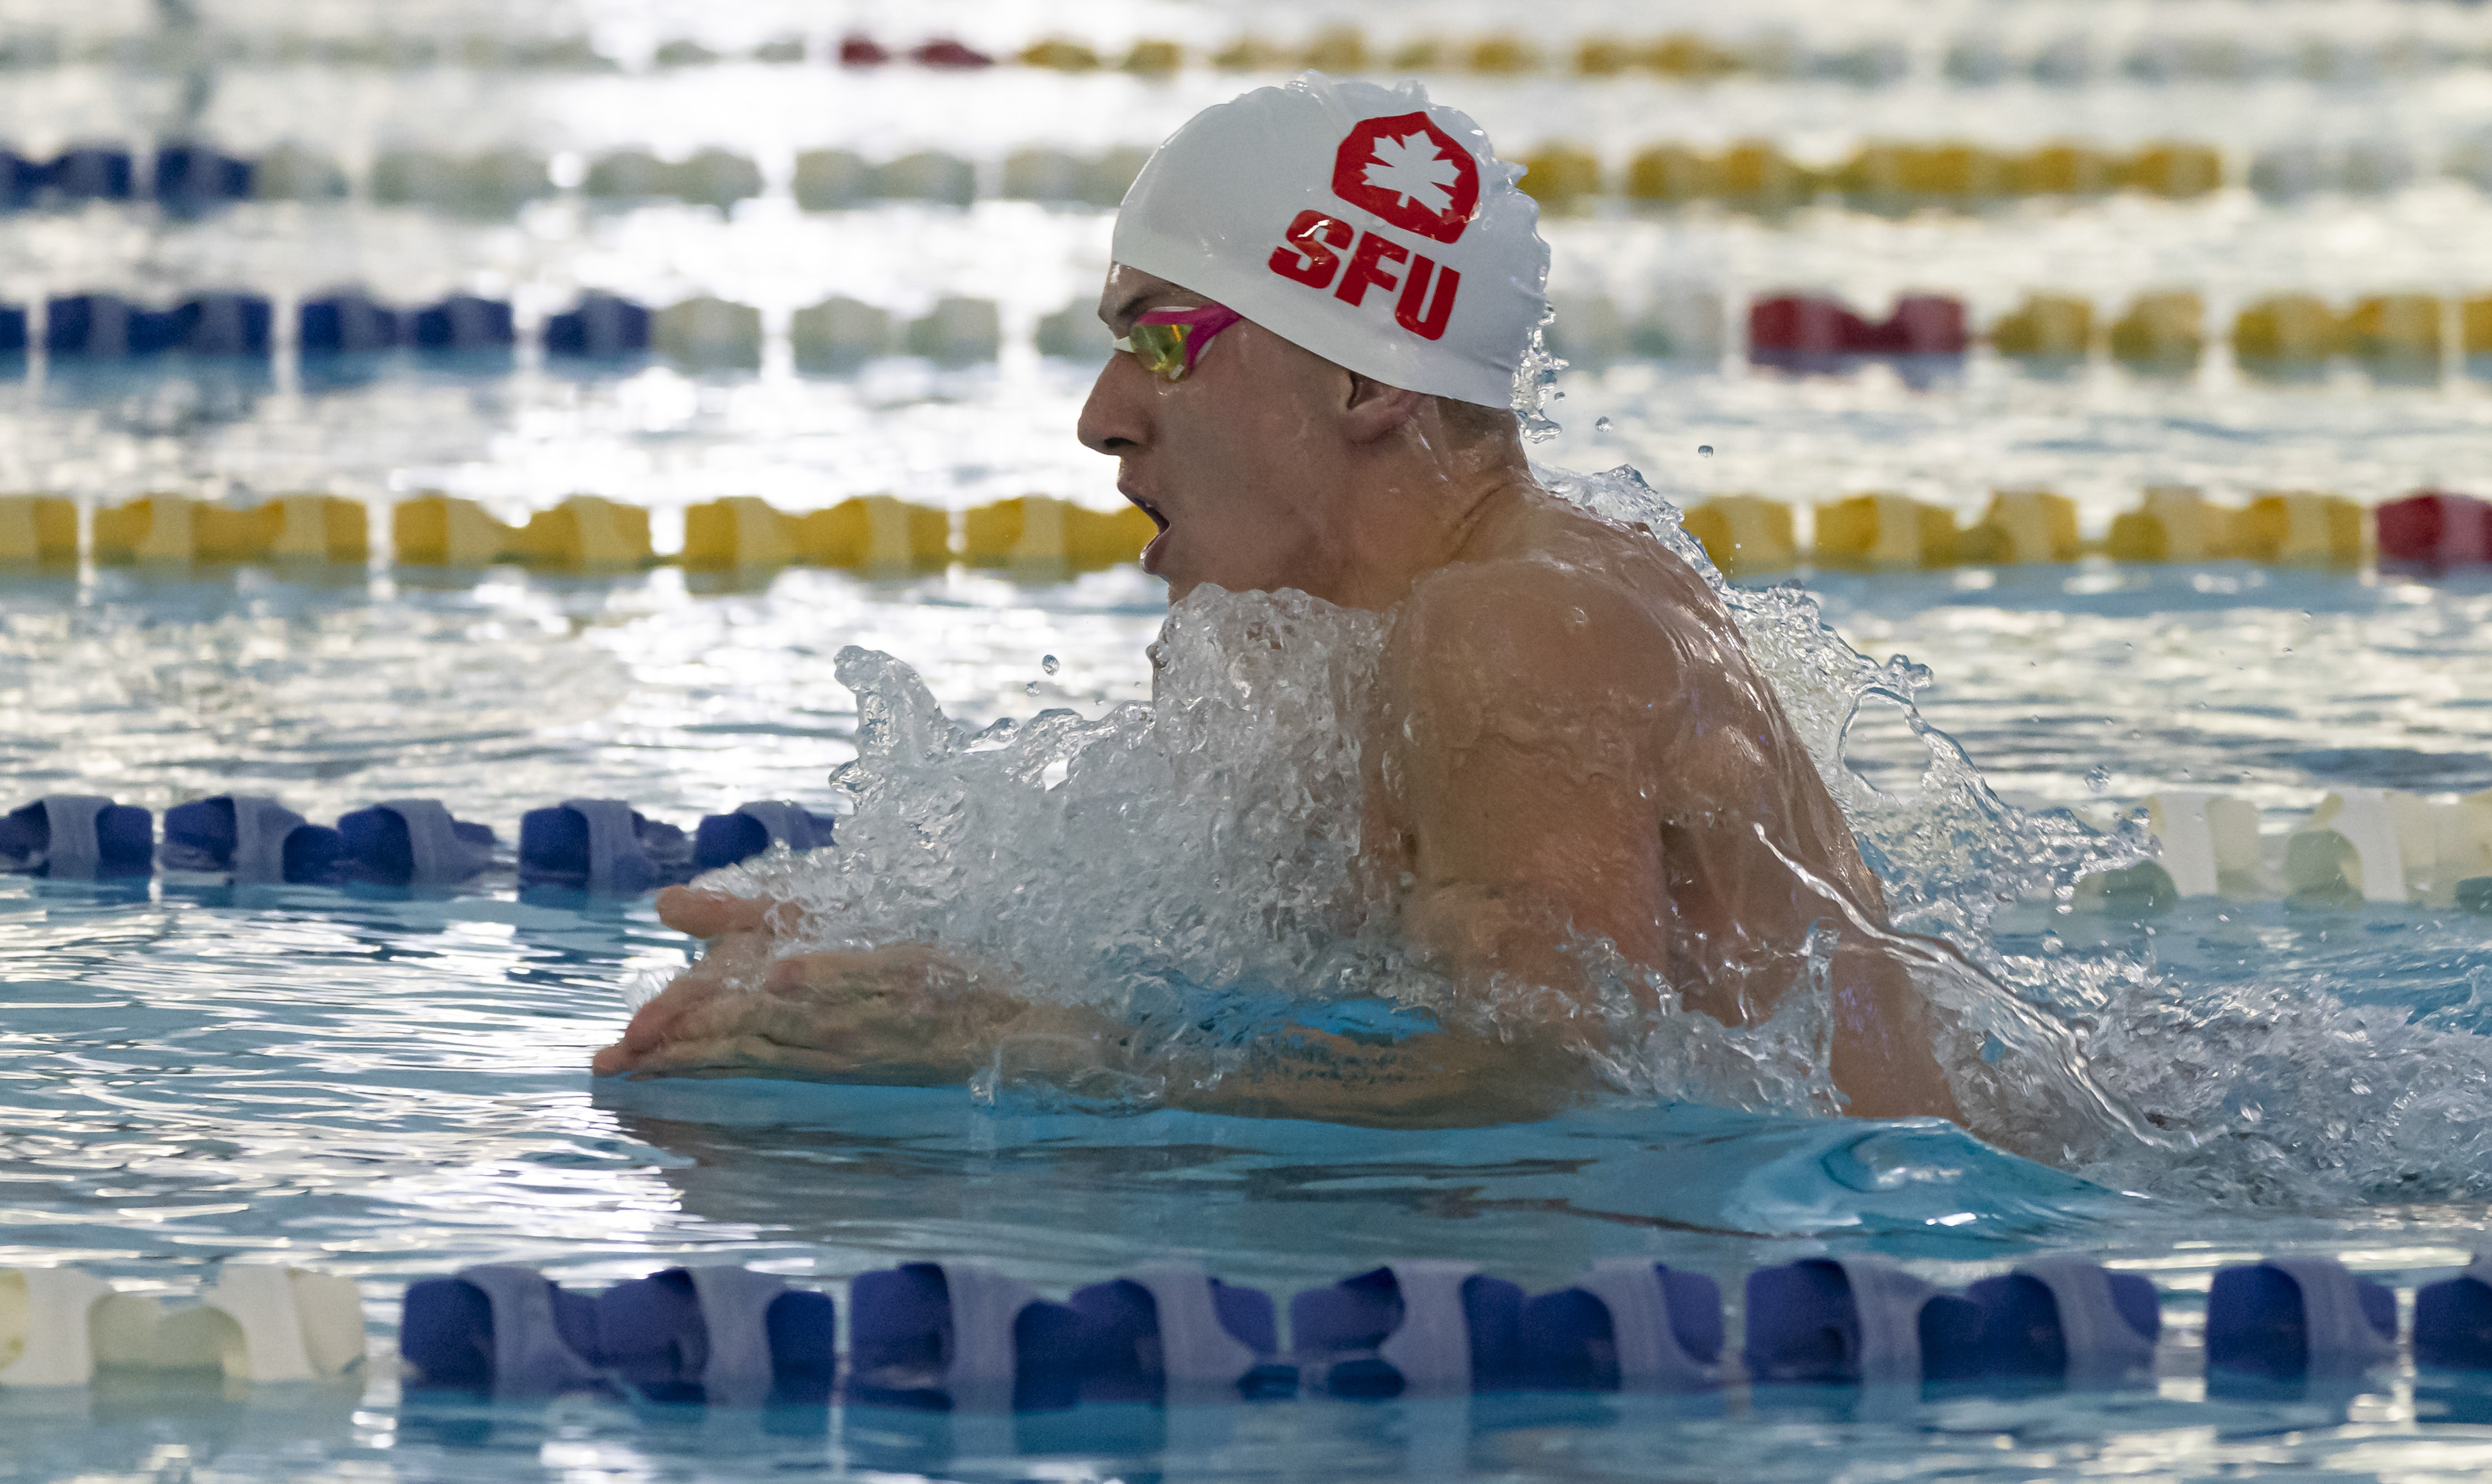 Collyn Gagne competing for Simon Fraser University | At Simon Fraser University Collyn Gagne wasn